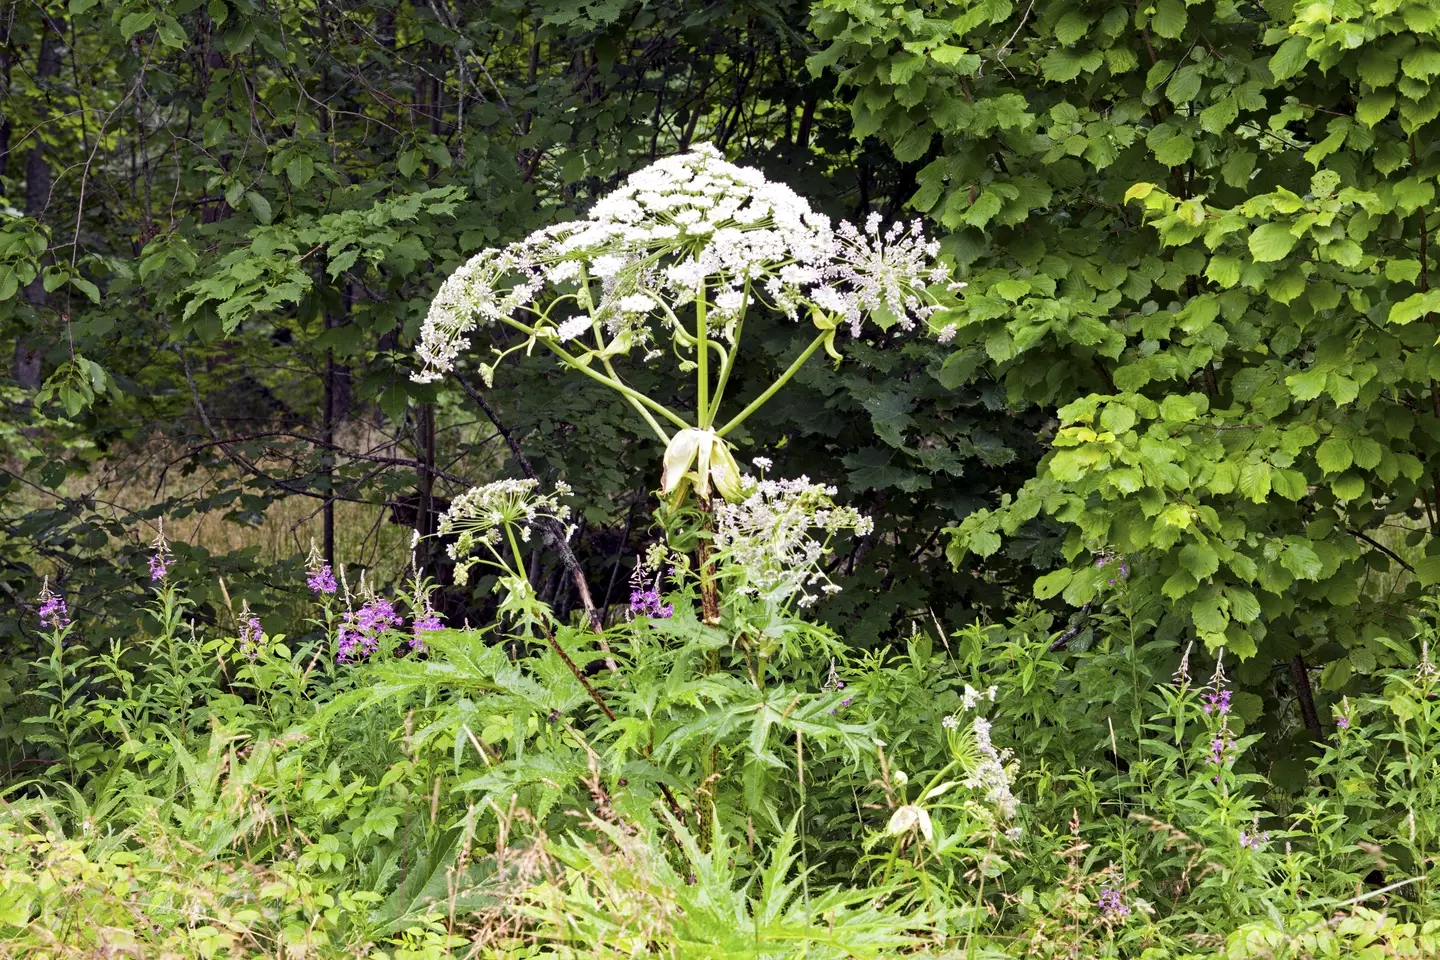 Giant hogweed can be very dangerous.